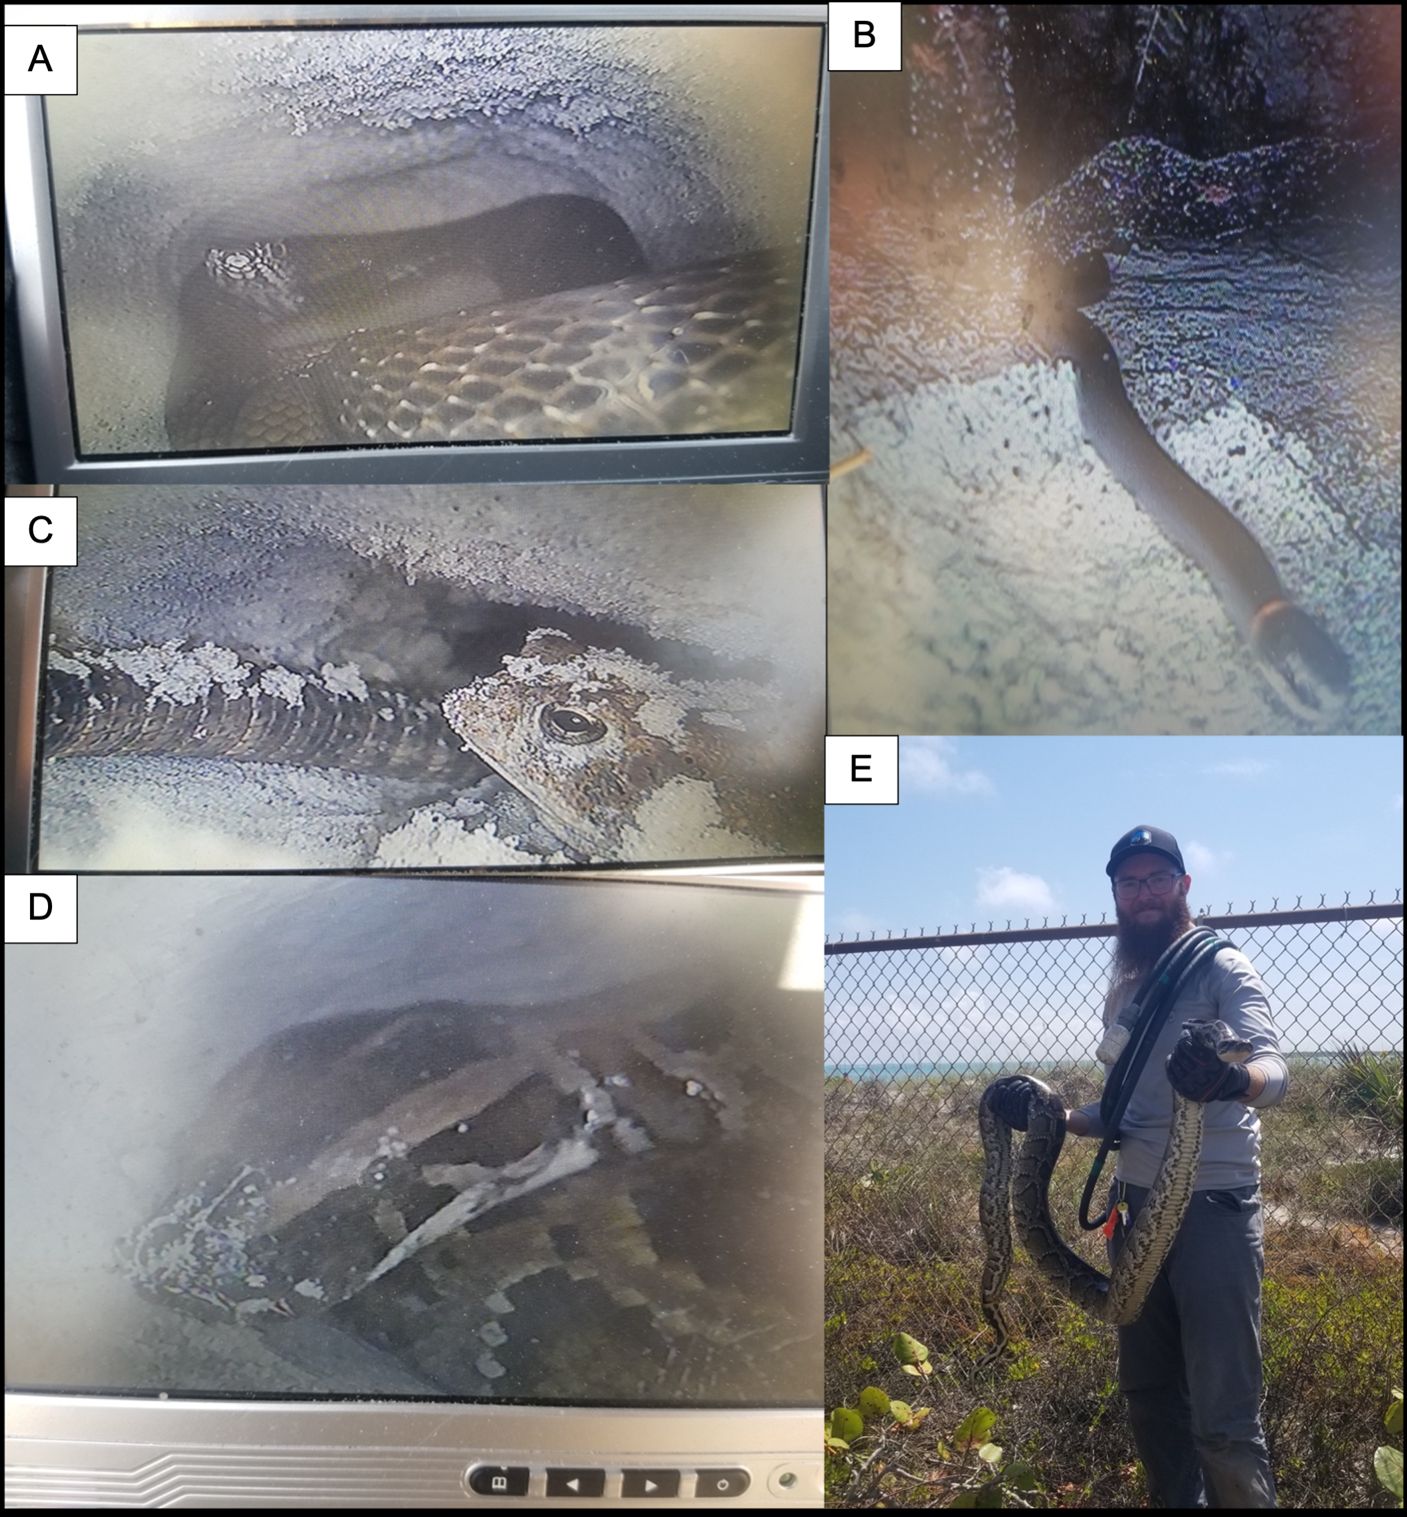 Other species found inside tortoise burrows during surveys conducted by the senior author on Gasparilla Island, FL. A) eastern coachwhip snake (native), B) southern ringneck snake (native), C) southern toad (native) with iguana tail, D; E) Burmese python (invasive). 